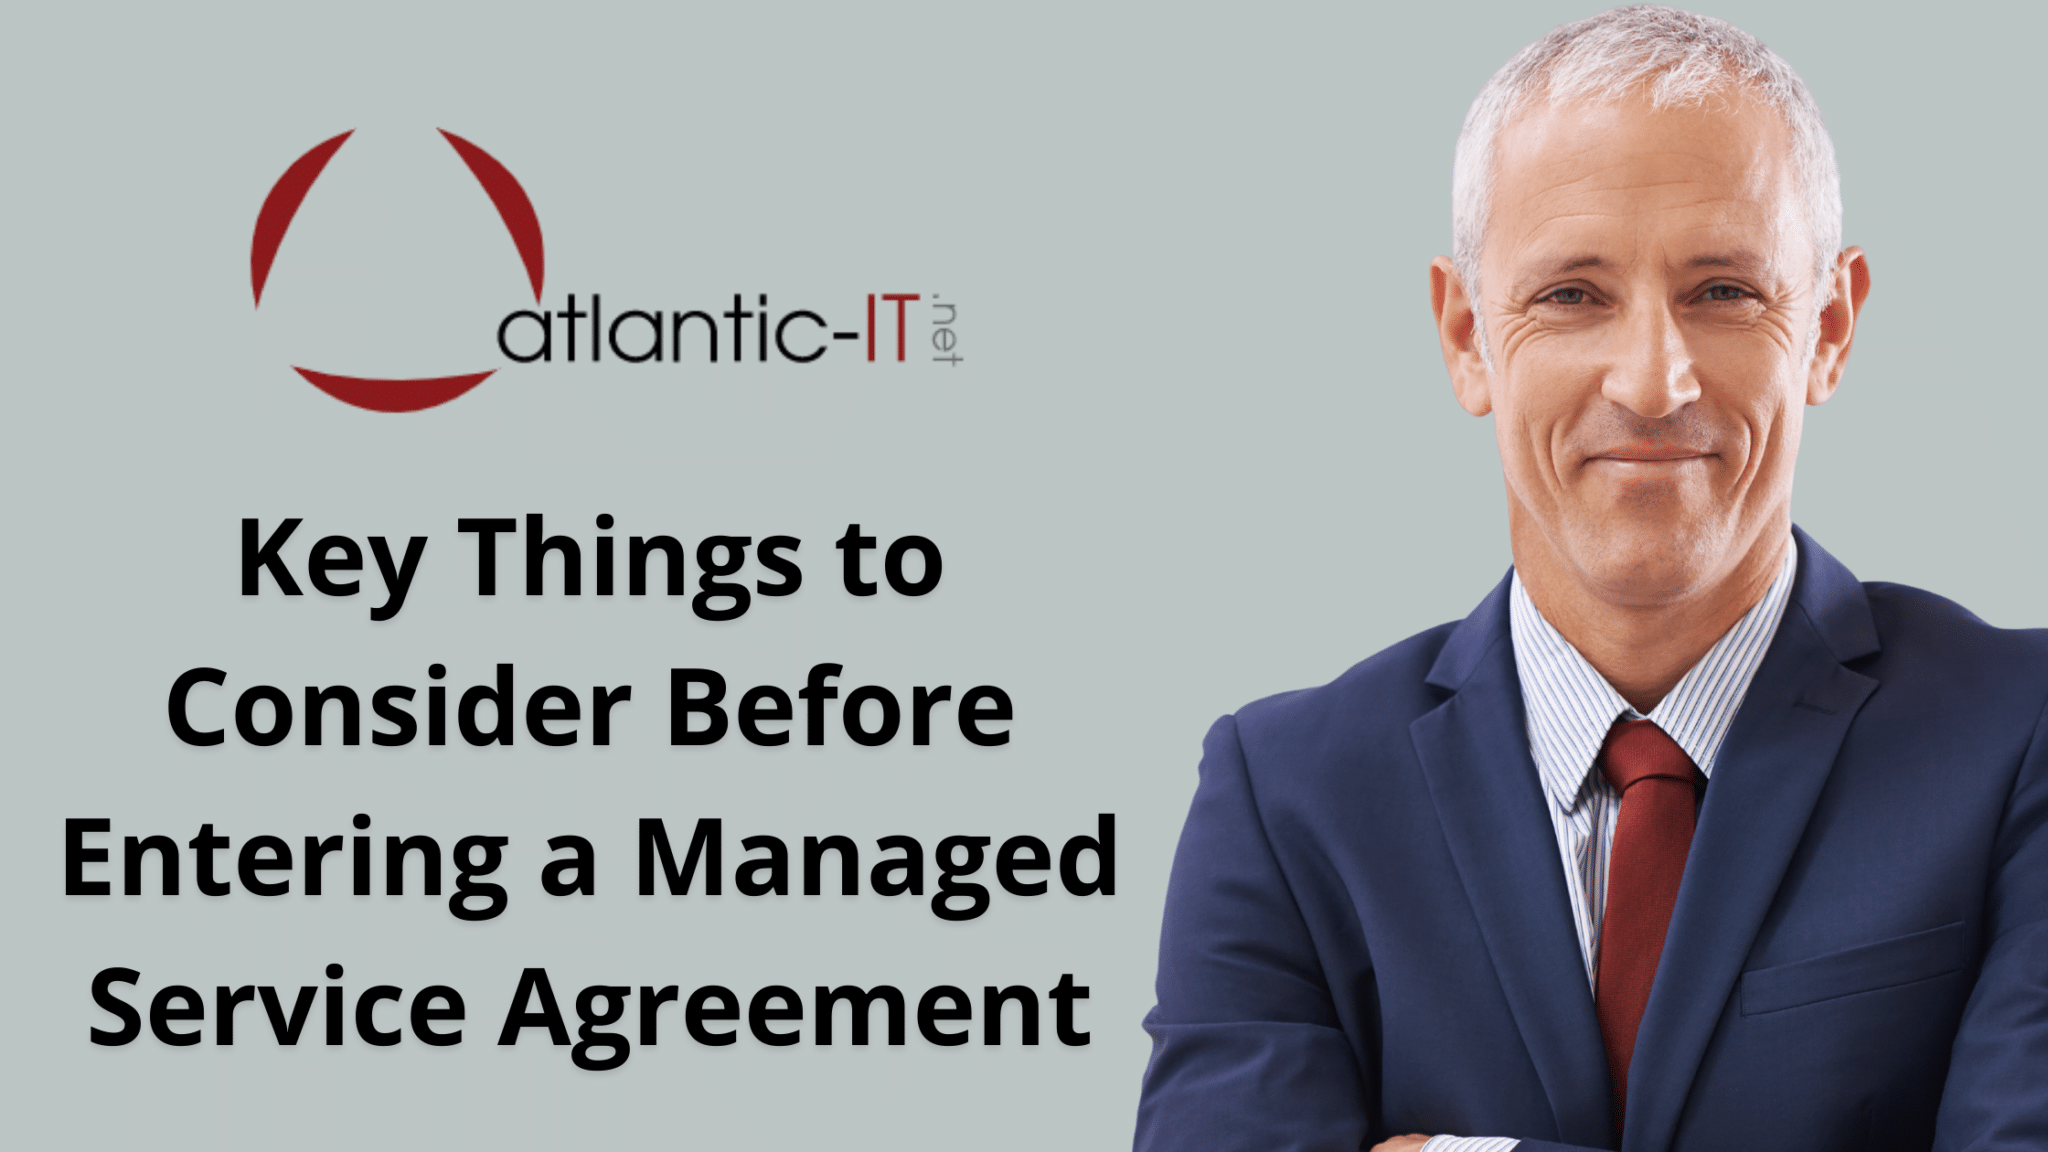 Key Things to Consider Before Entering a Managed Service Agreement